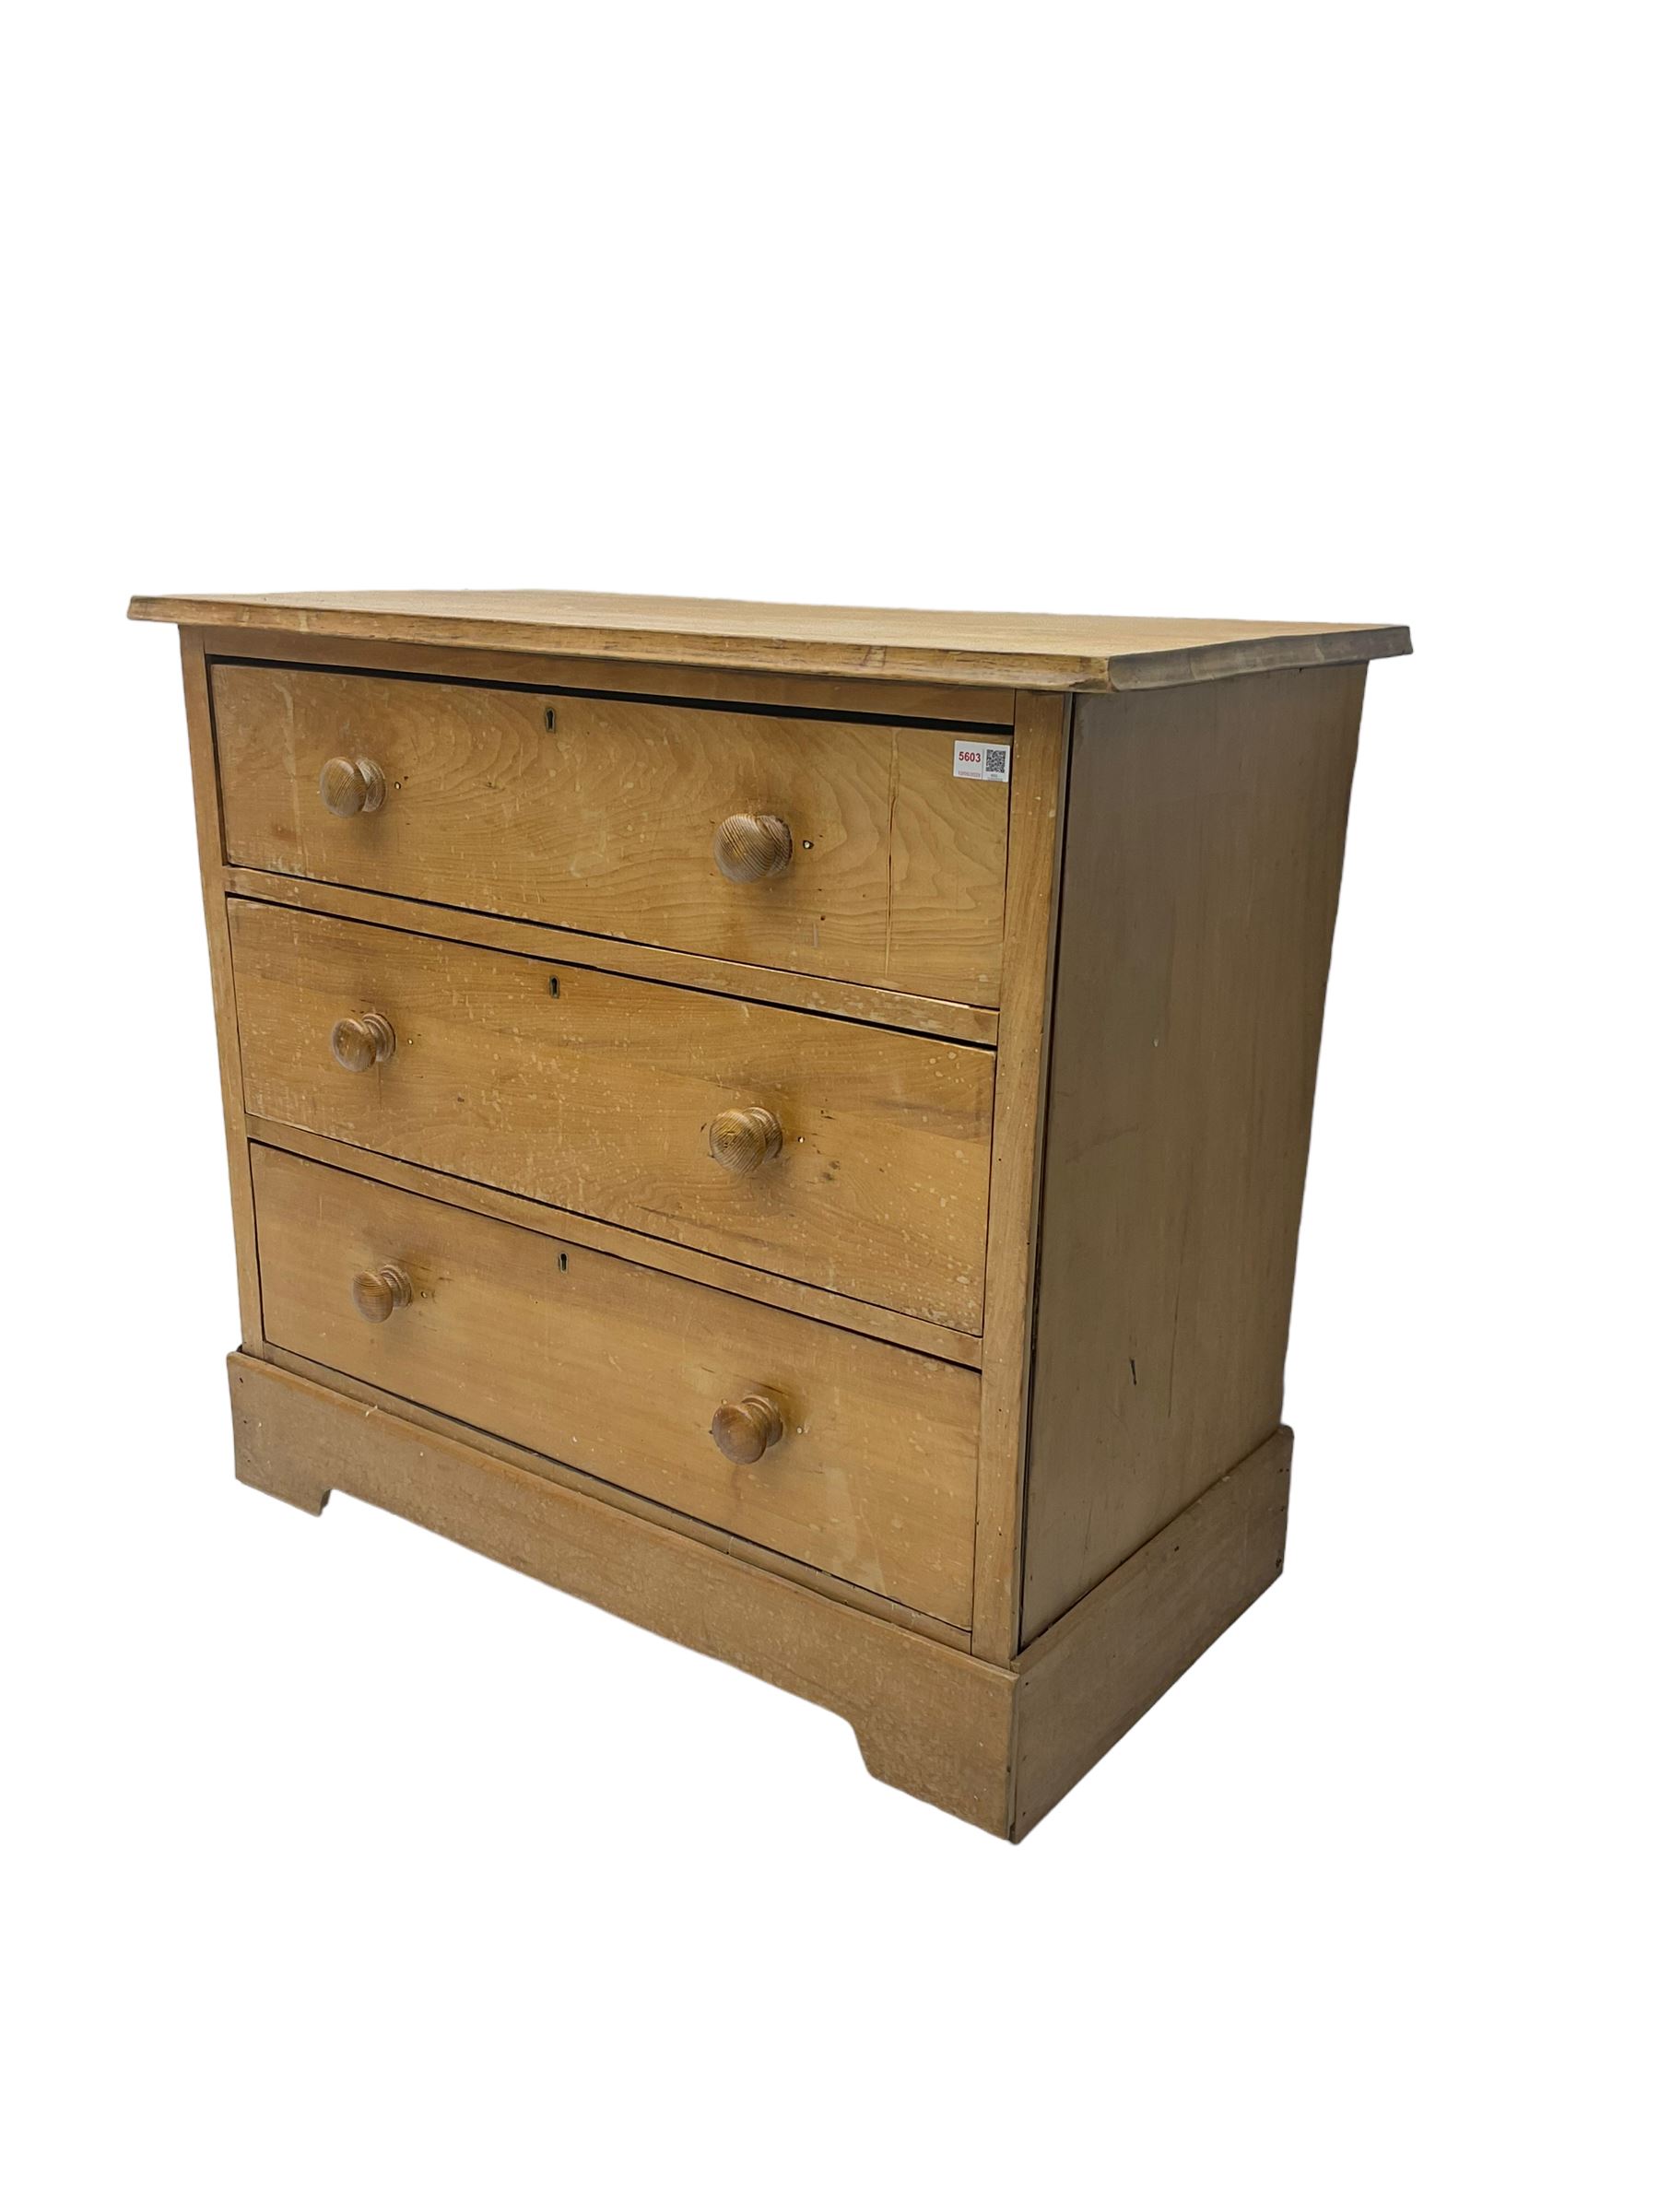 Traditional rustic pine chest fitted with three drawers - Image 2 of 2